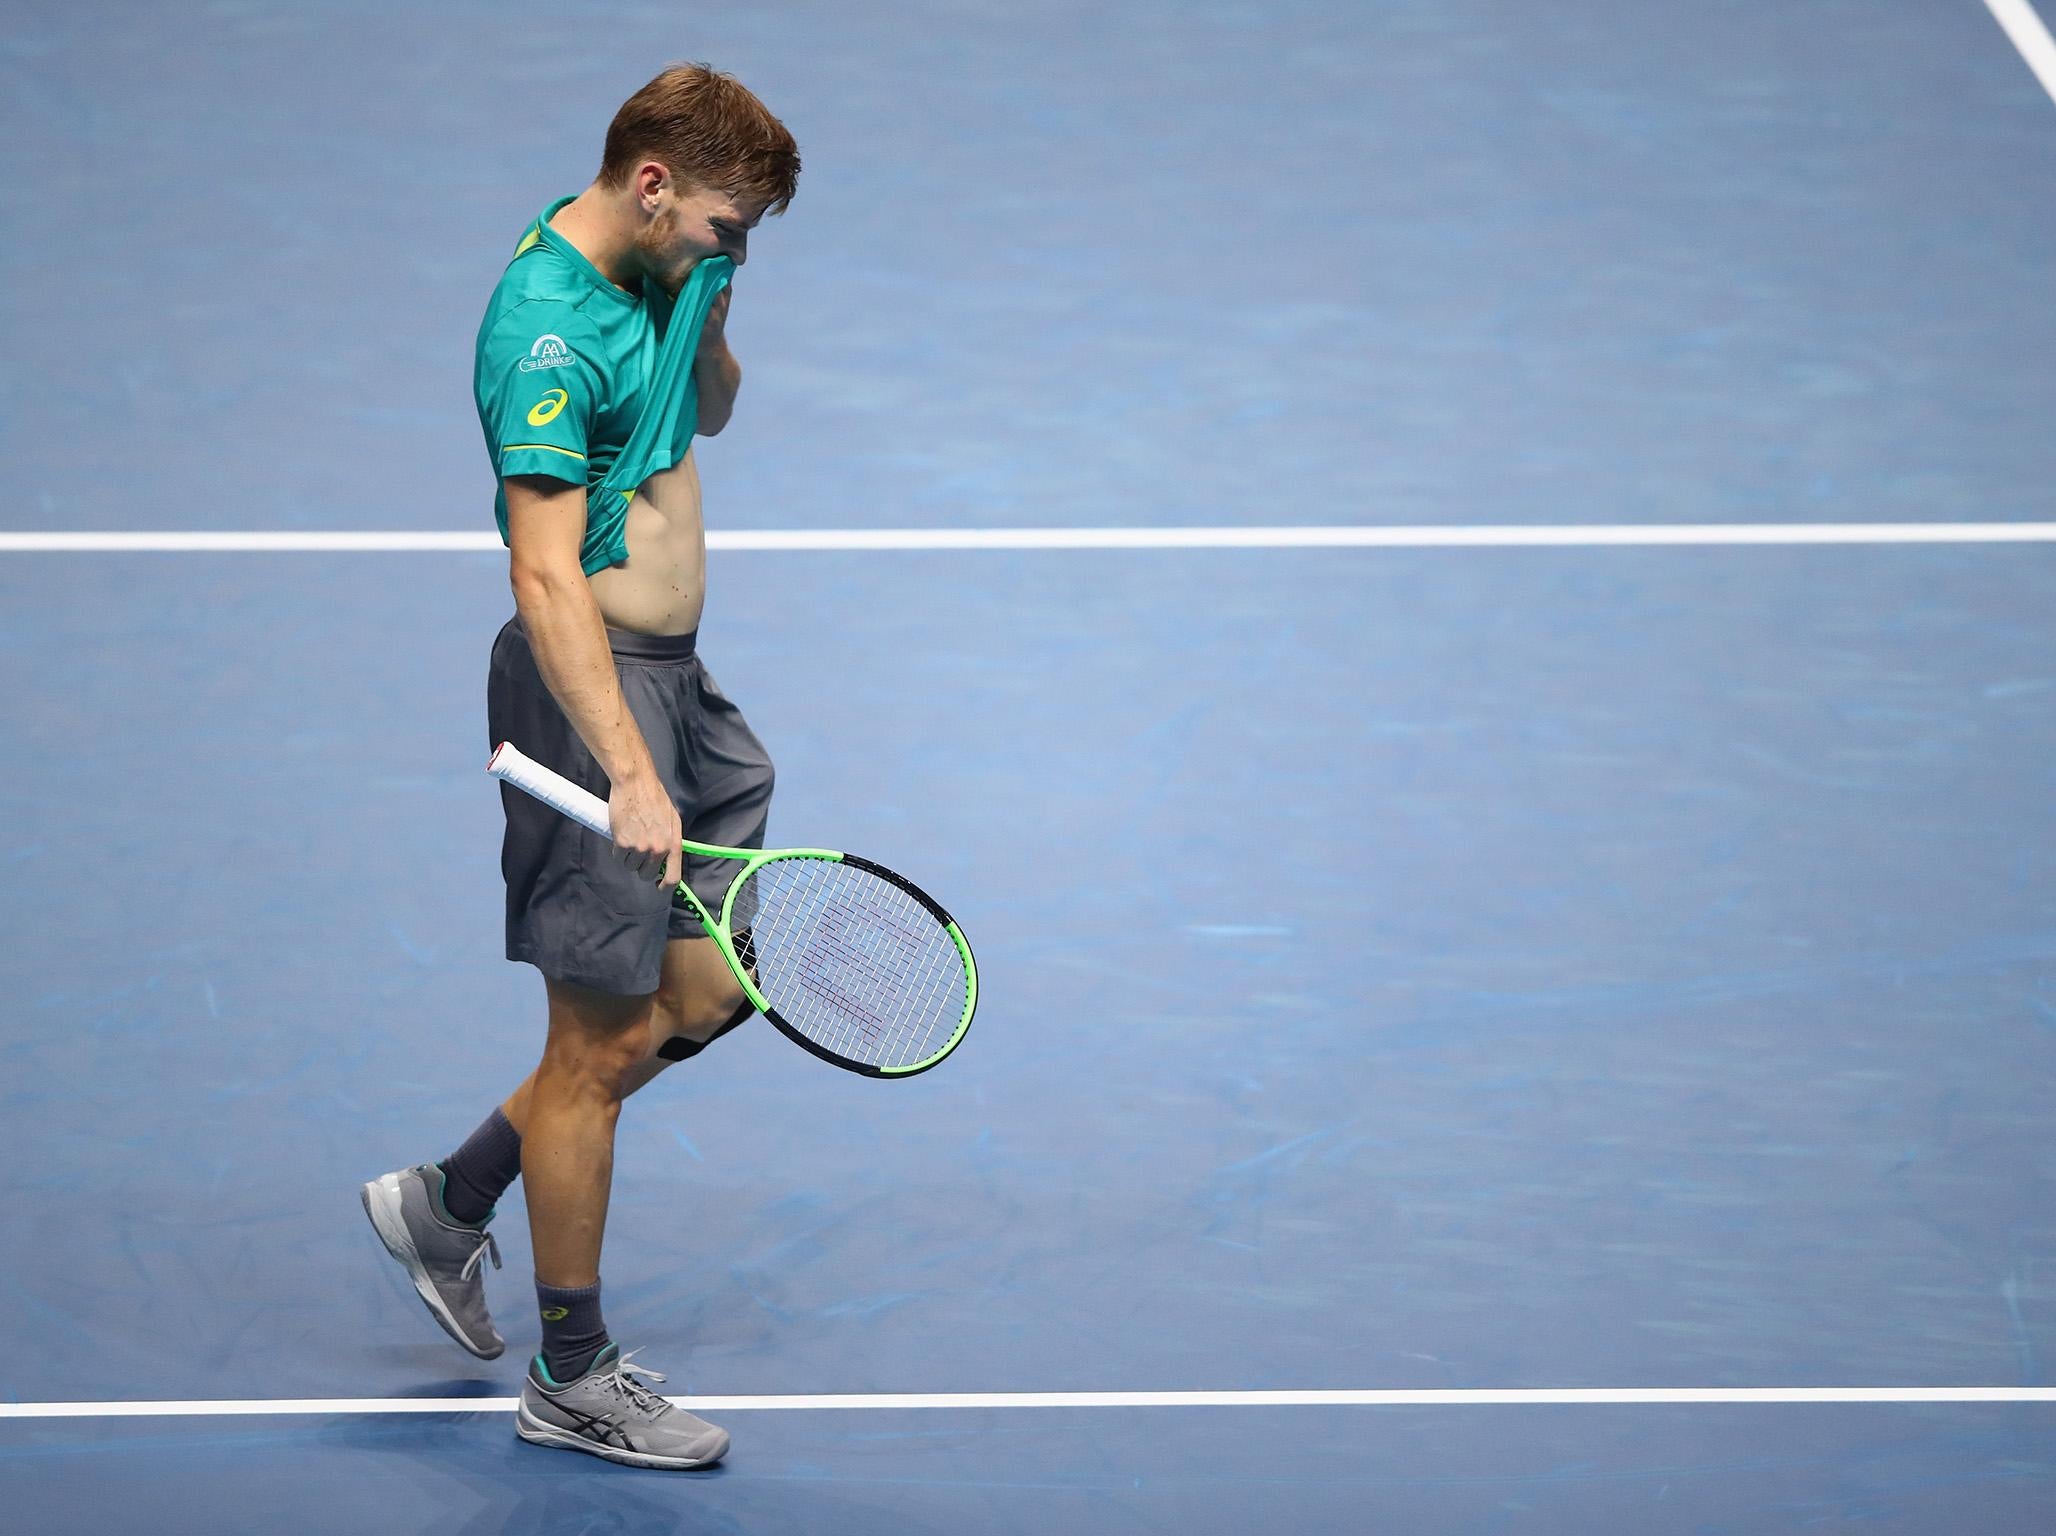 David Goffin appeared to be struggling with an ankle injury